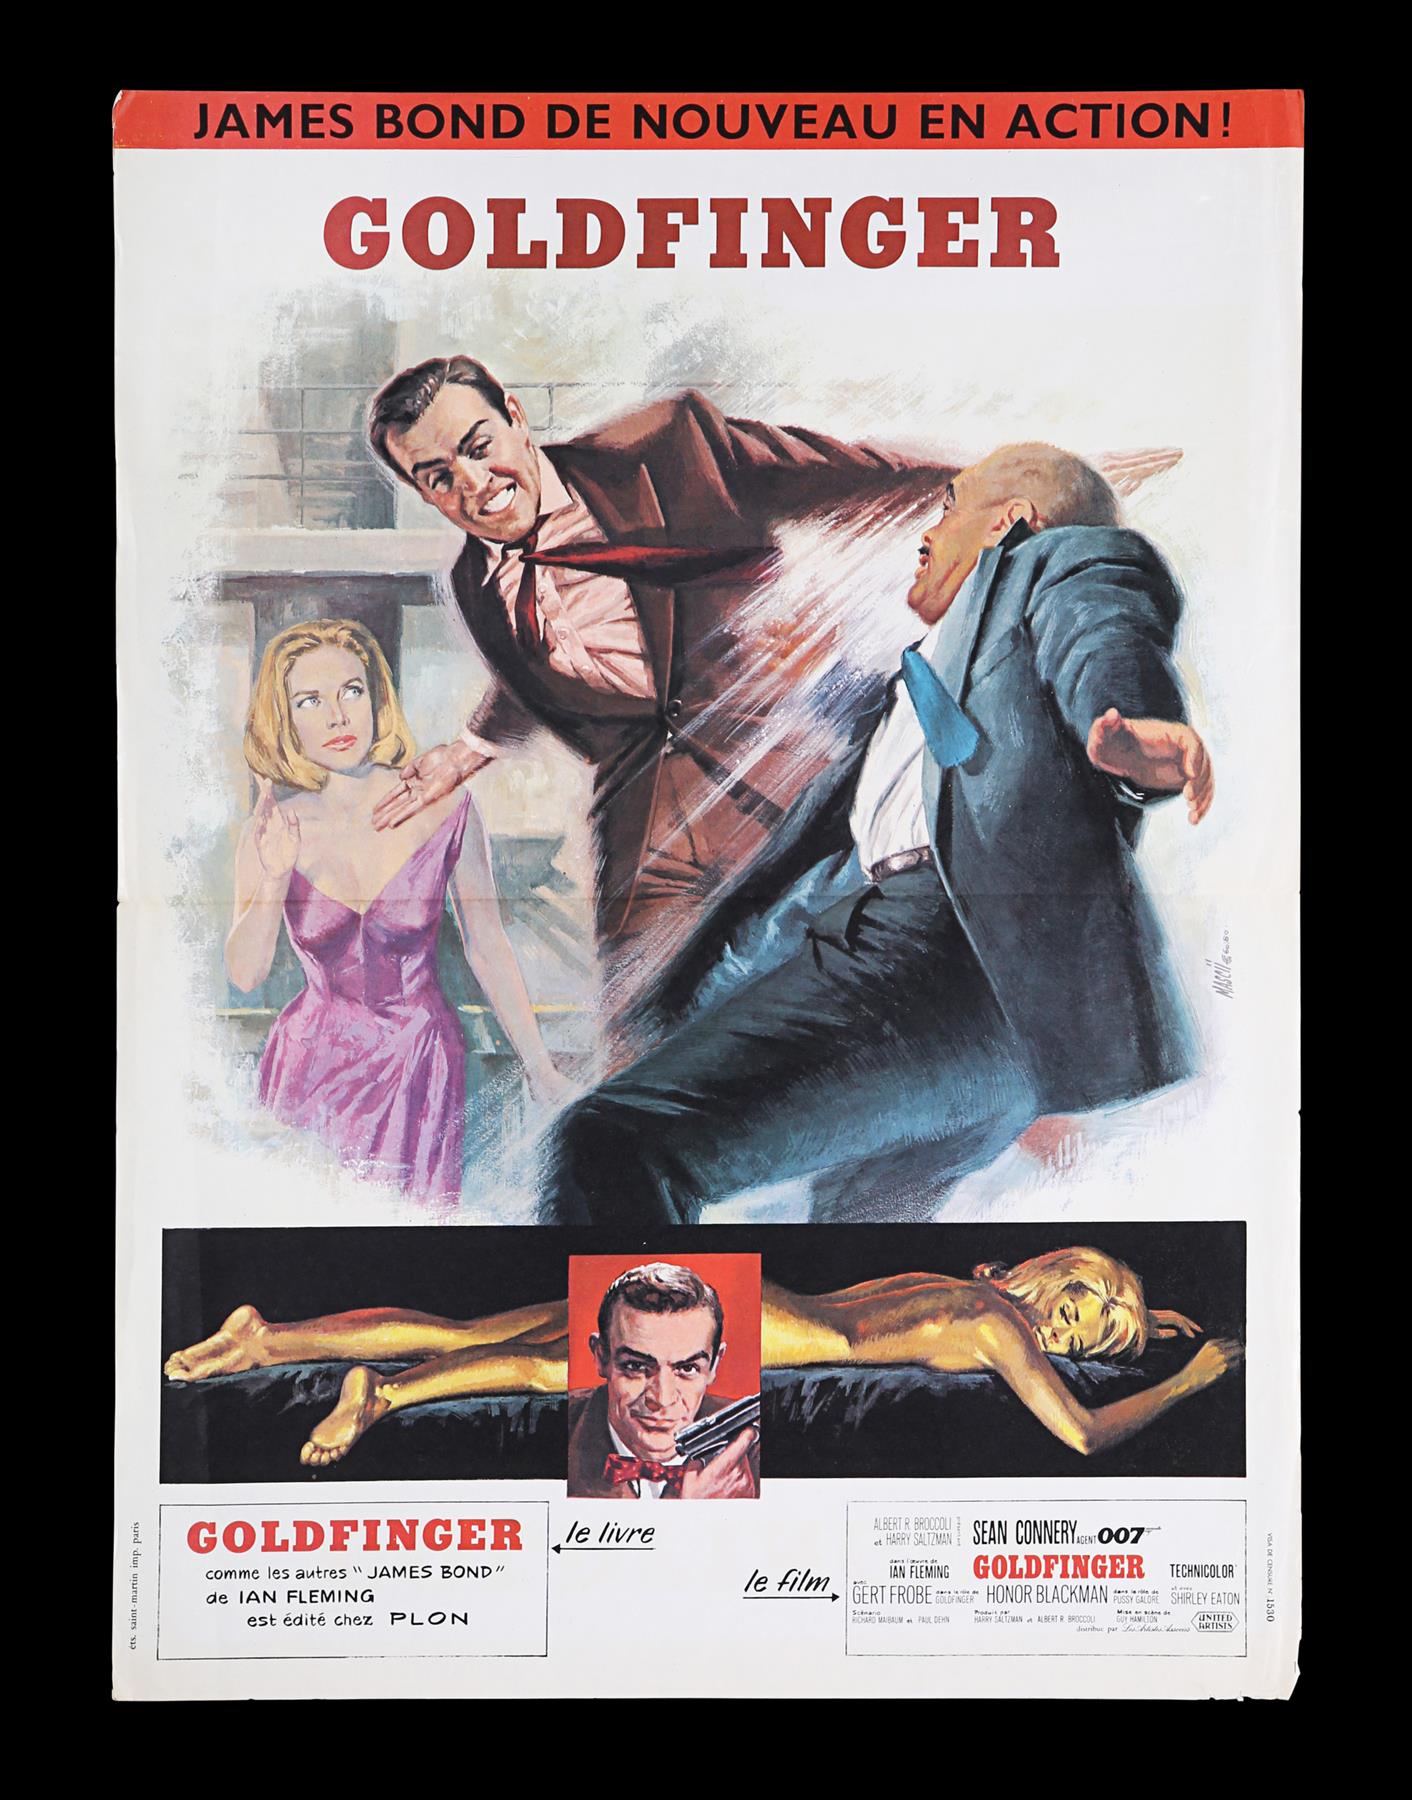 GOLDFINGER (1964) - French Petite Affiche, 1964